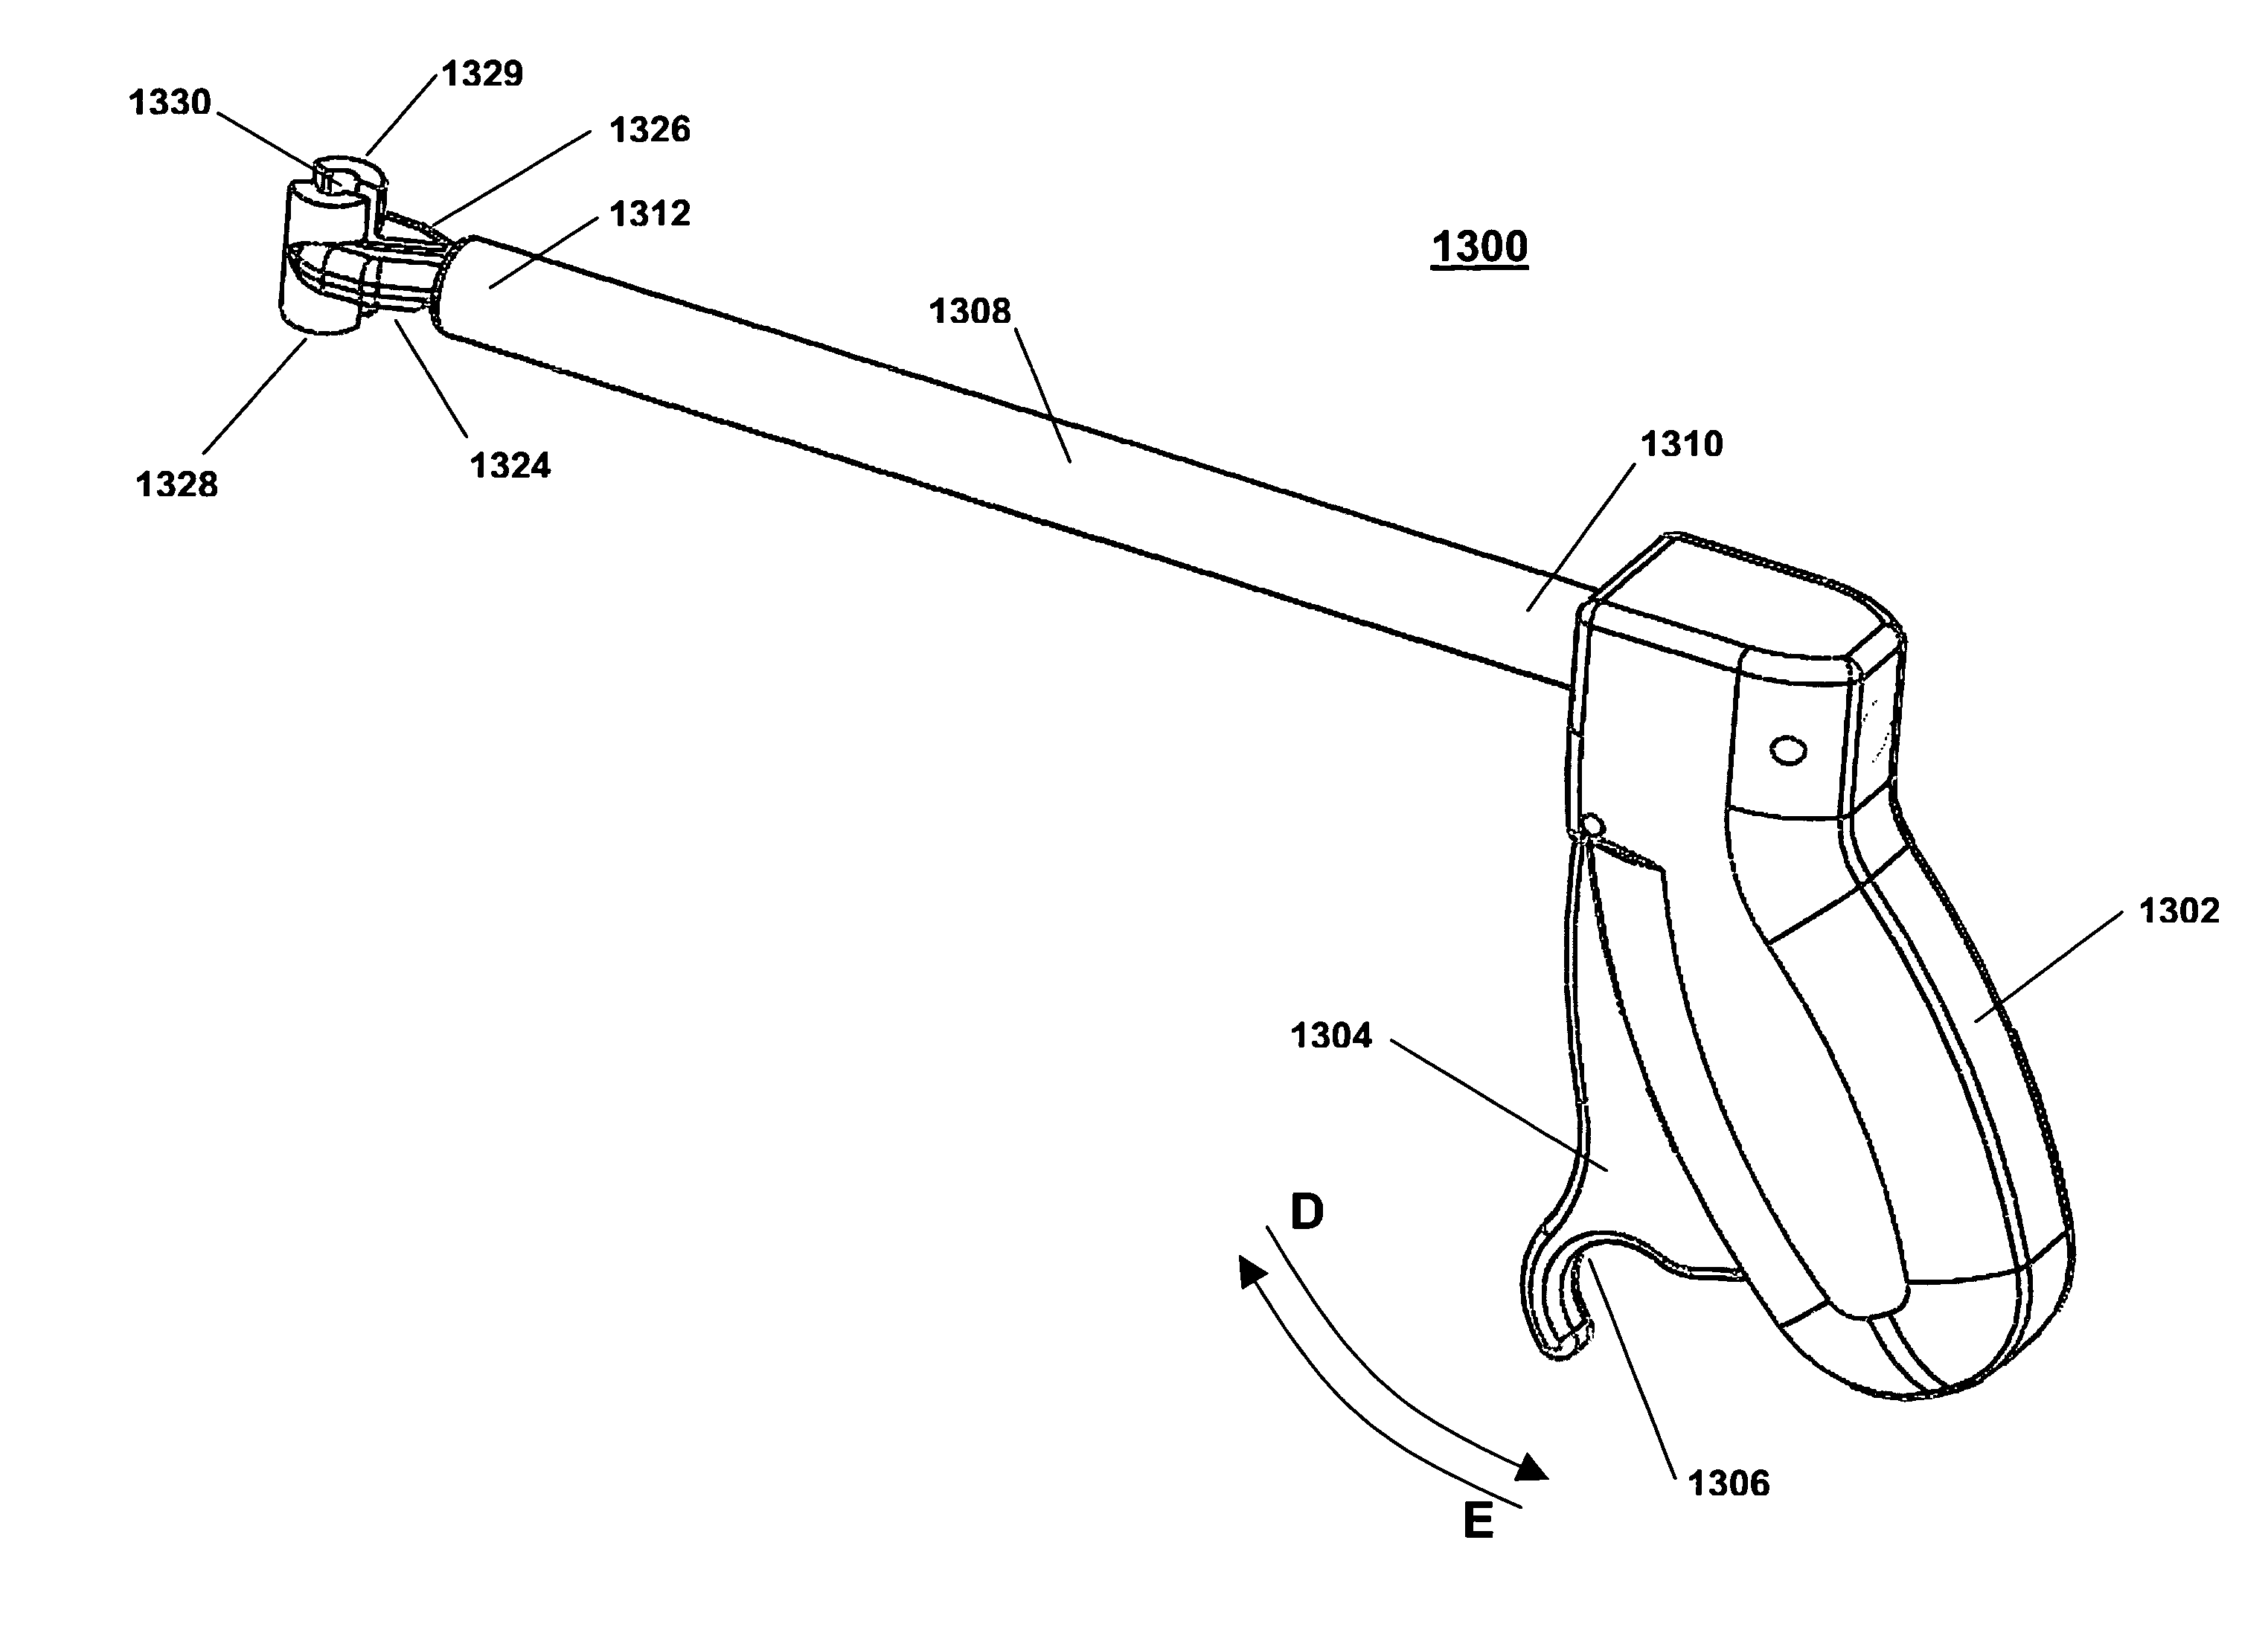 Guide forceps device for use with vertebral treatment device, system and methods of use